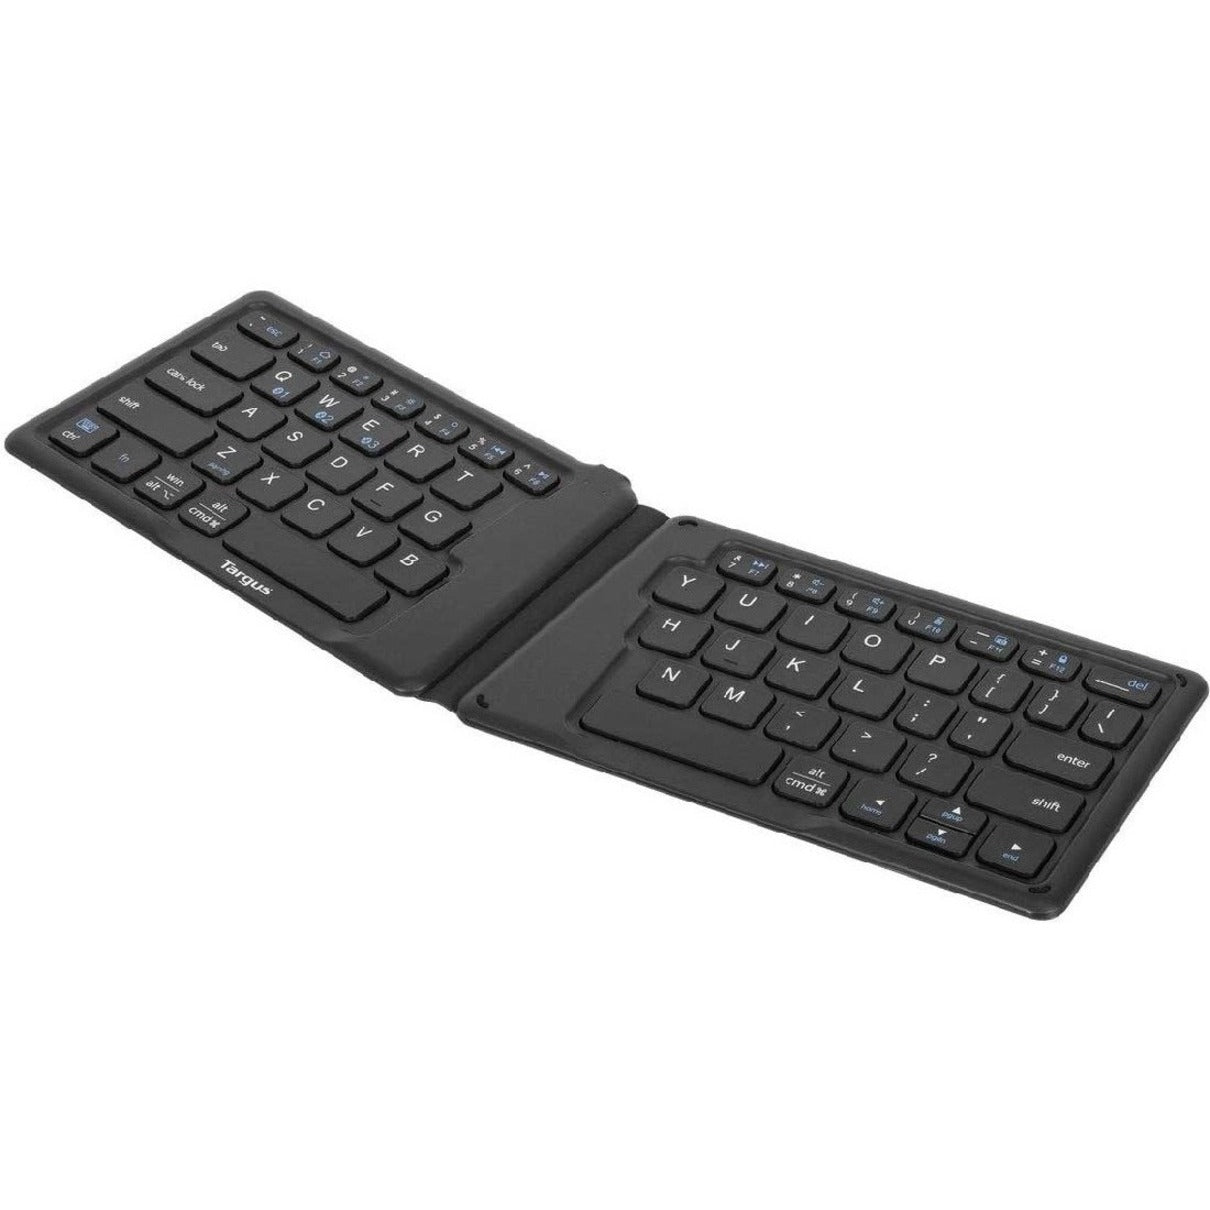 Targus AKF003US Ergonomic Foldable Bluetooth Antimicrobial Keyboard, Compact and Rechargeable